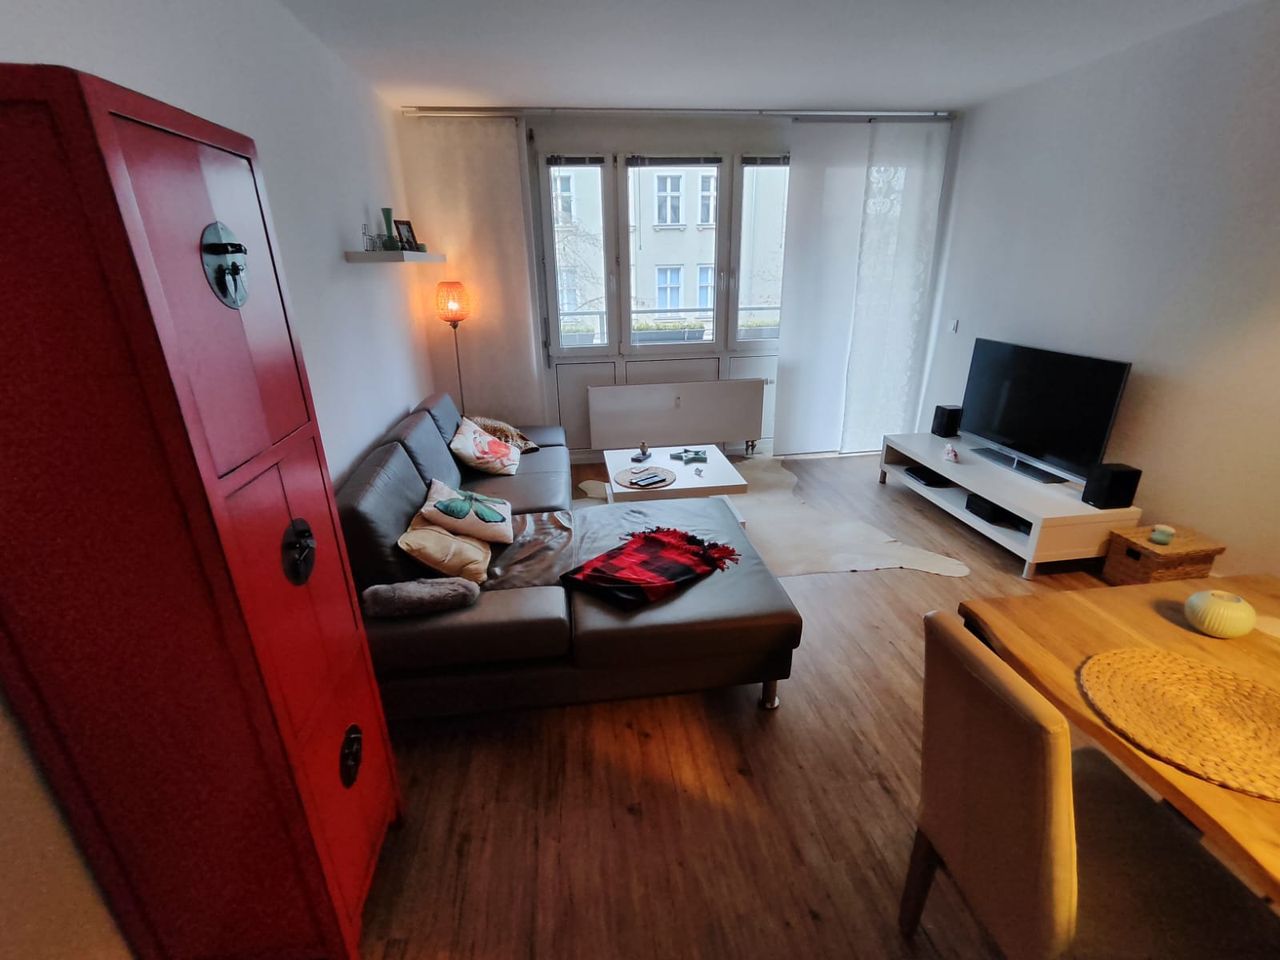 Charming, peaceful 3-room apartment located in Mitte between Mauerpark and Rosenthaler Platz.